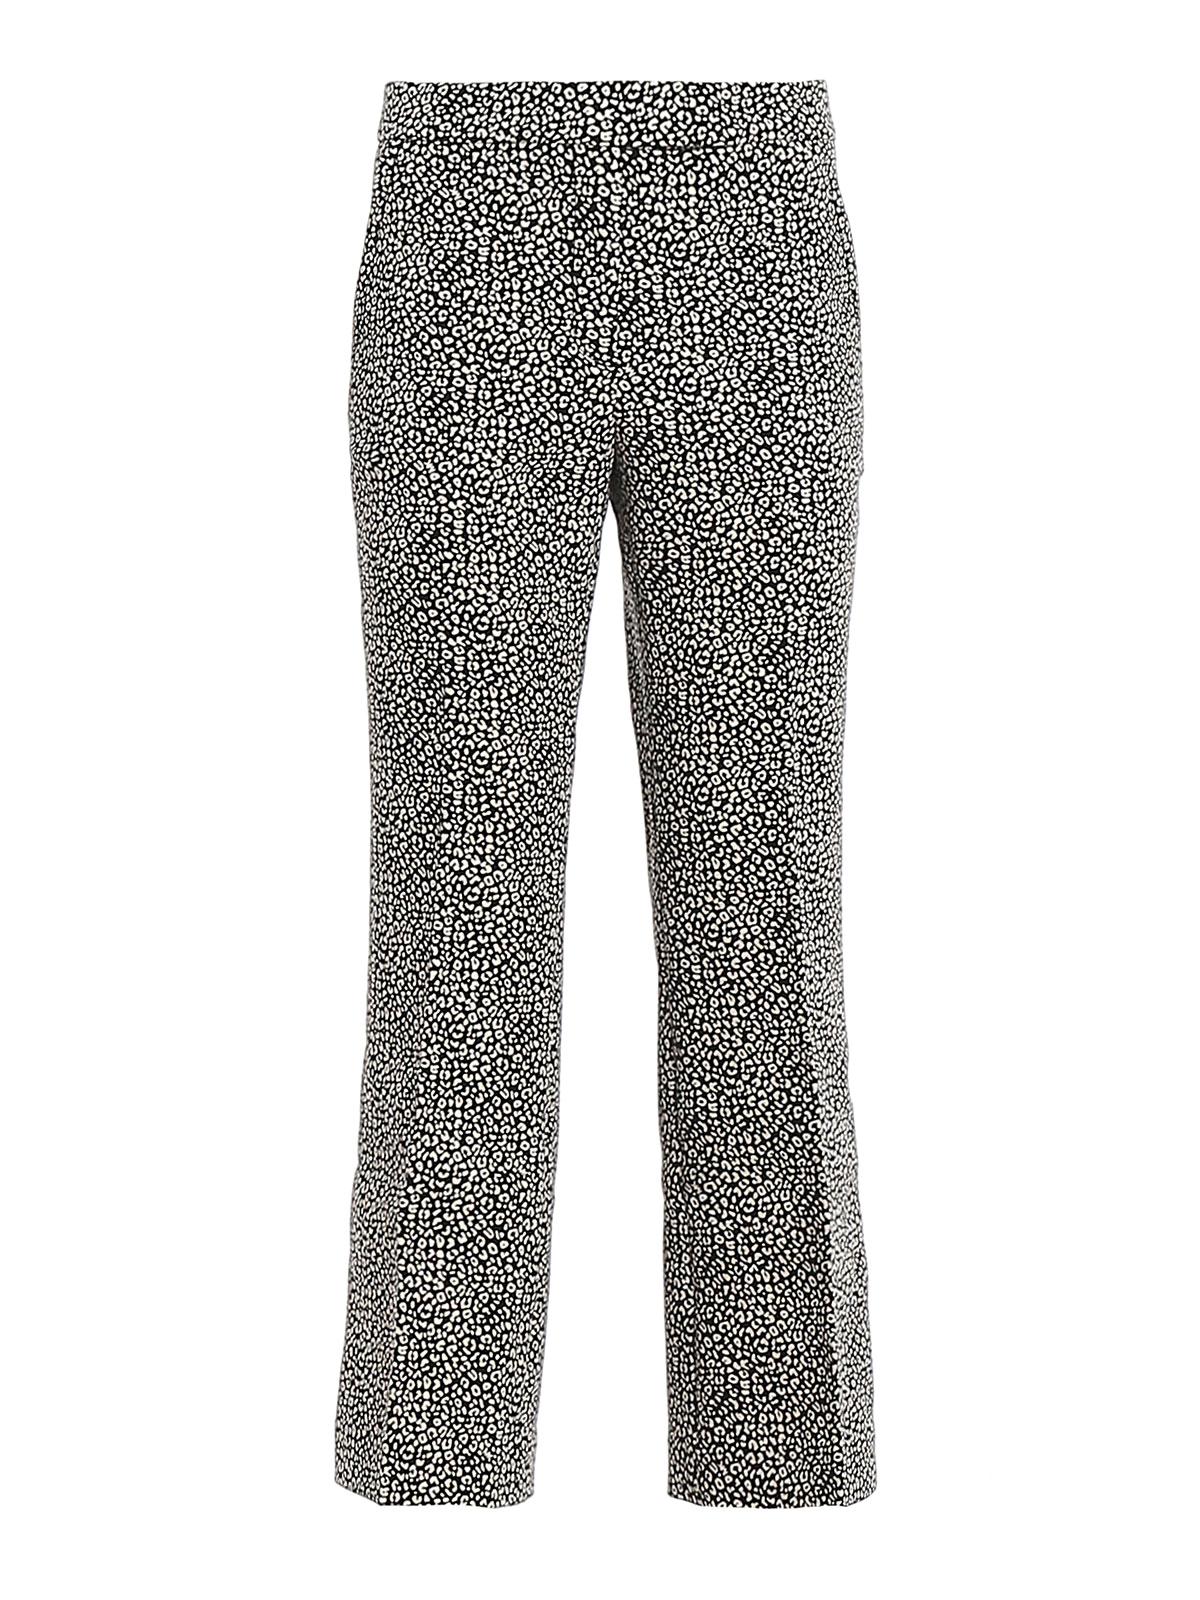 MICHAEL KORS PATTERNED BOOTCUT CROP TROUSERS